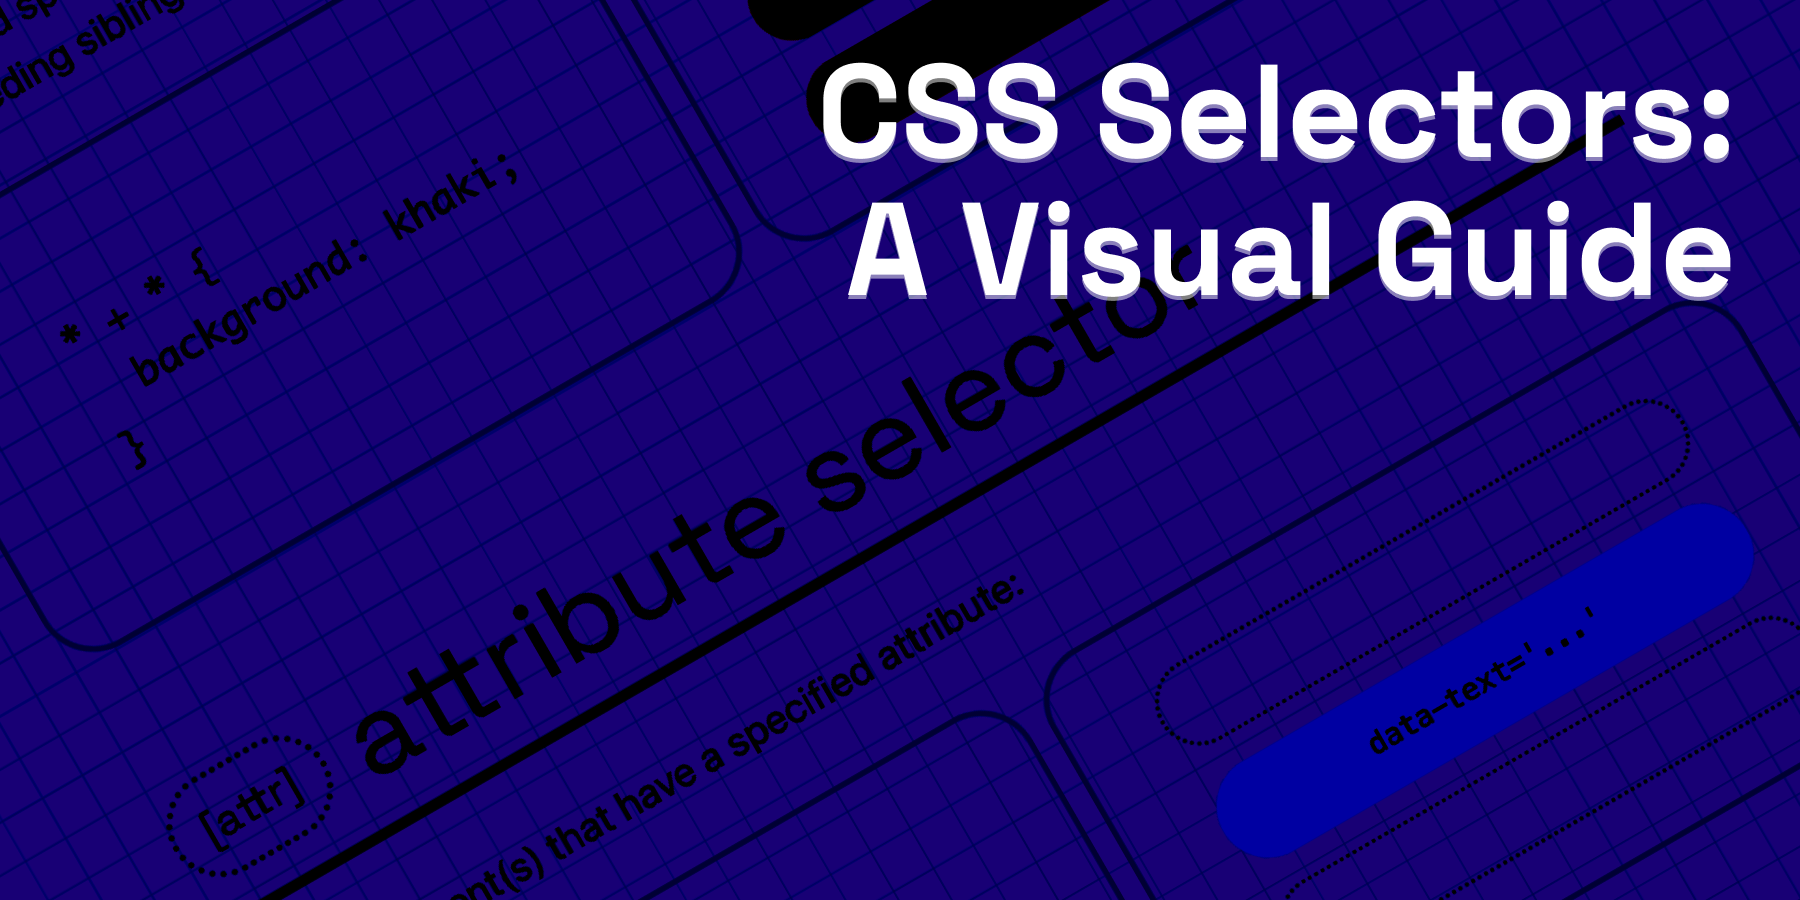 CSS Selectors: A Visual Guide & Reference